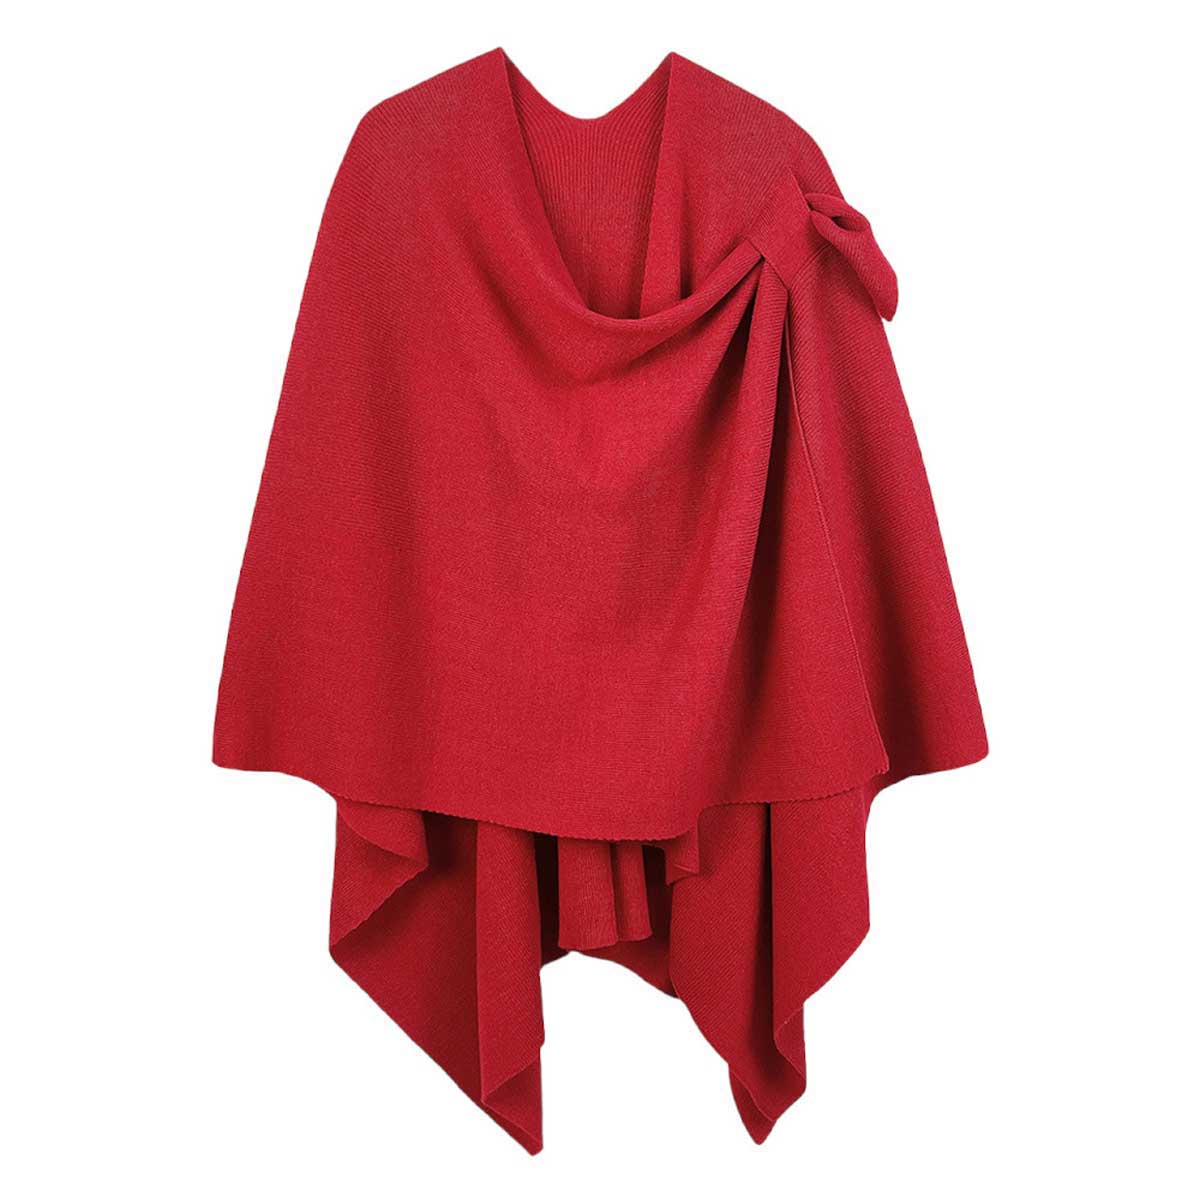 Red Shoulder Strap Solid Ruana Poncho, with the latest trend in ladies outfit cover-up! the high-quality bling border solid neck poncho is soft, comfortable, and warm but lightweight. Stay protected from the chilly weather while taking your elegant looks to a whole new level with an eye-catching, luxurious outfit women! 